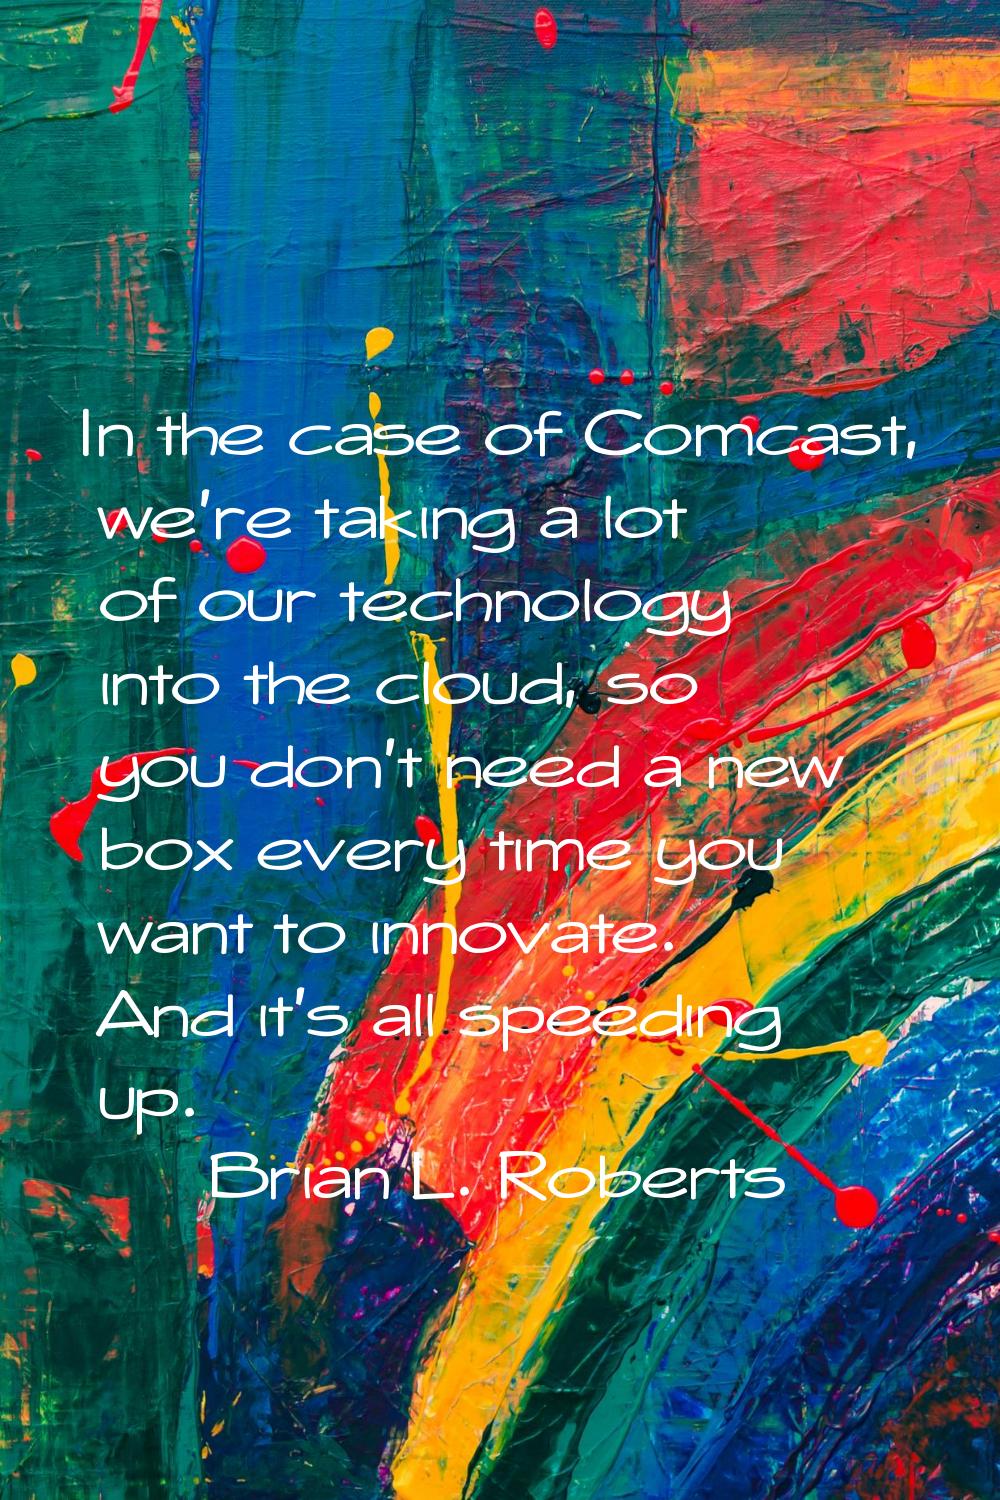 In the case of Comcast, we're taking a lot of our technology into the cloud, so you don't need a ne